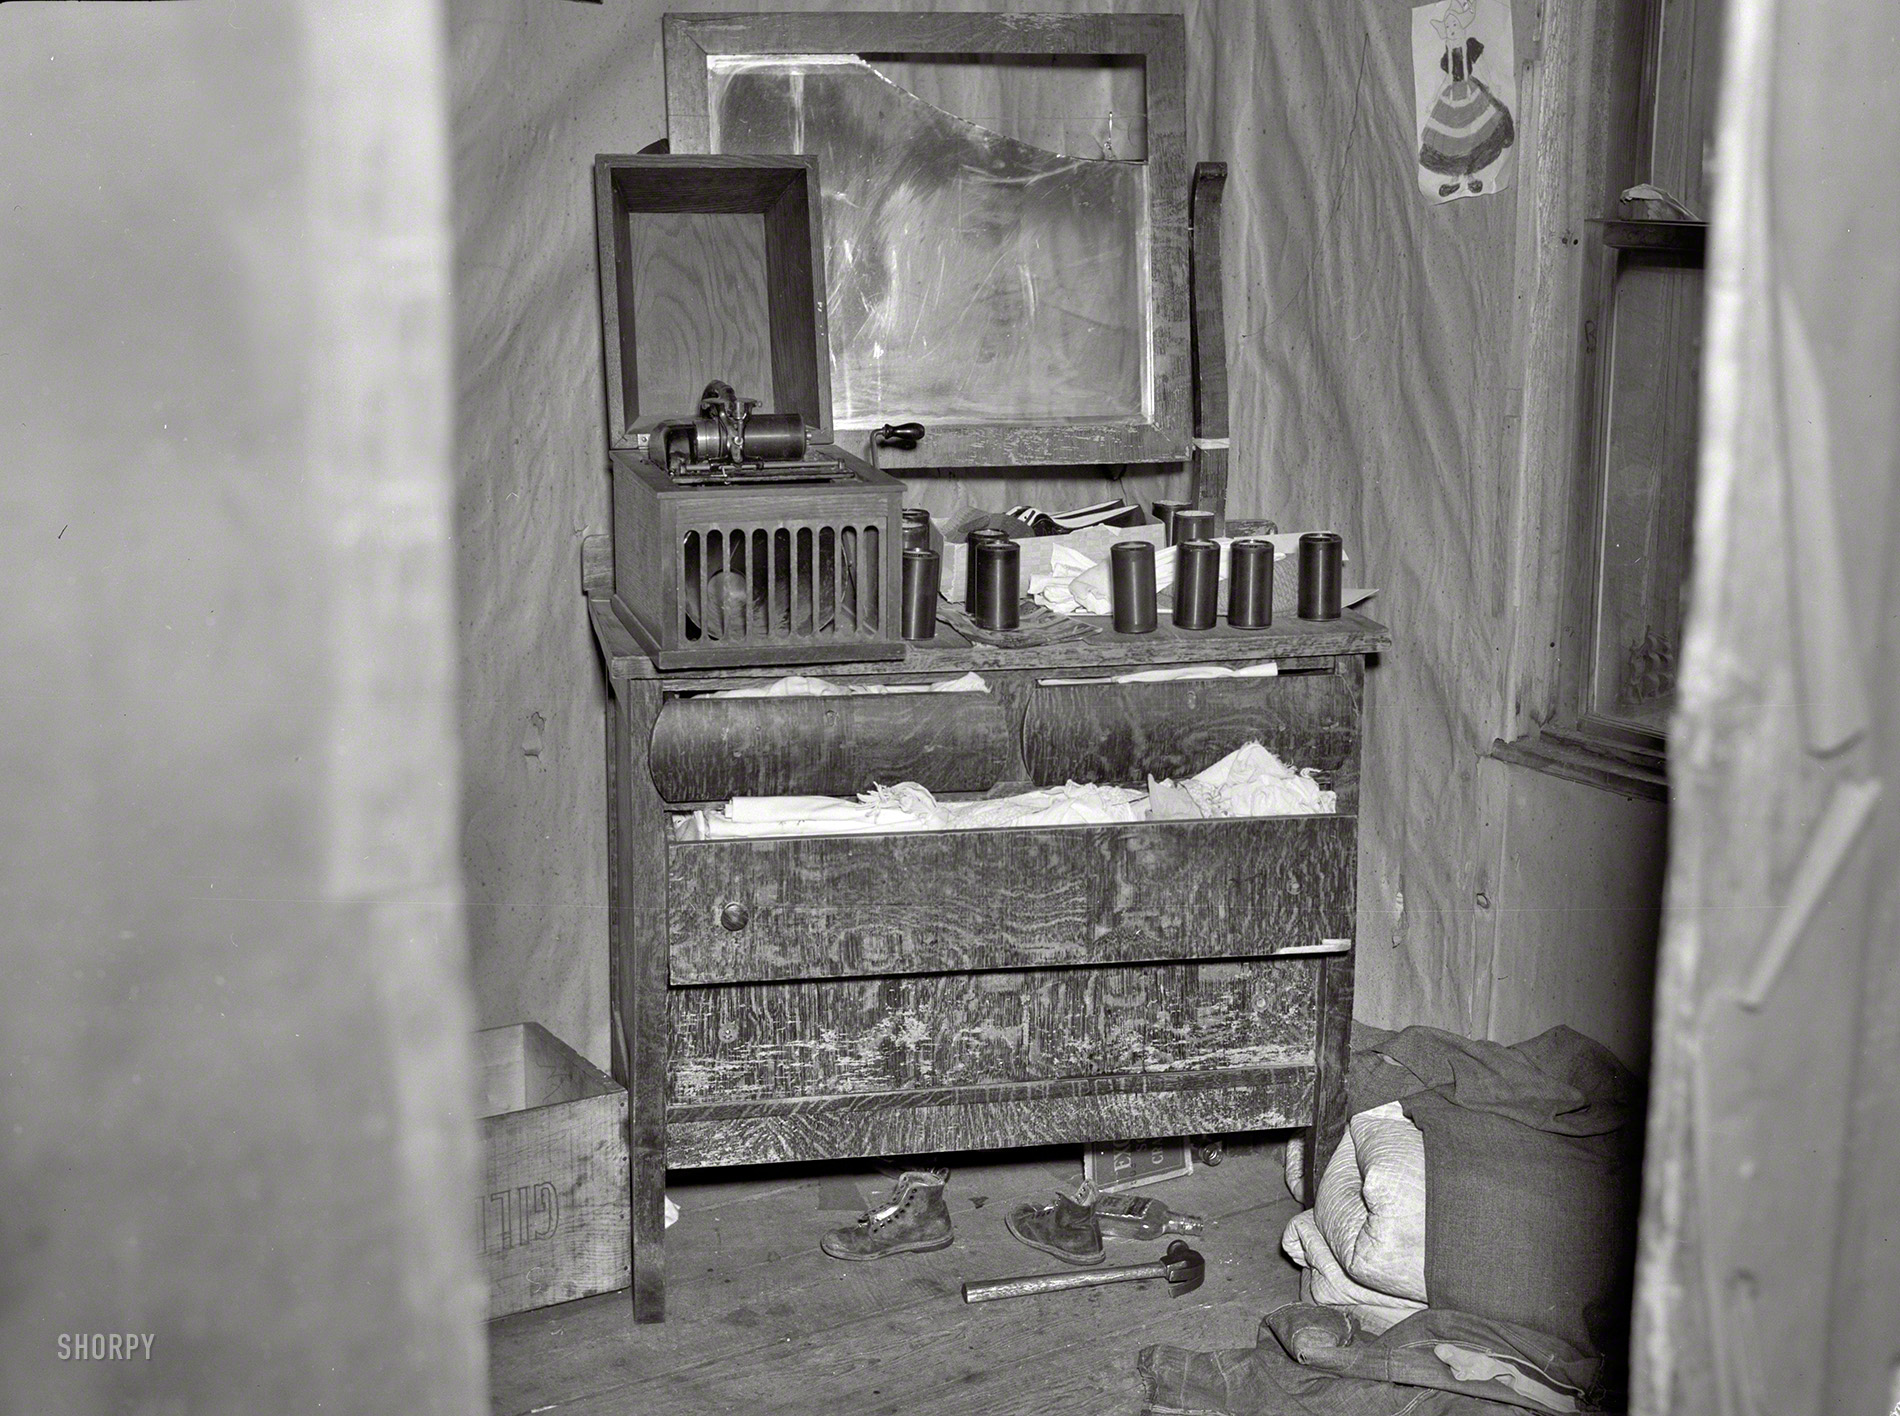 April 1937. "Bureau in the bedroom of the house occupied by the Ingrahams and the Smallwoods near Nelma, Wisconsin." A cryptic tableau if there ever was one. Medium-format nitrate negative by Russell Lee. View full size.